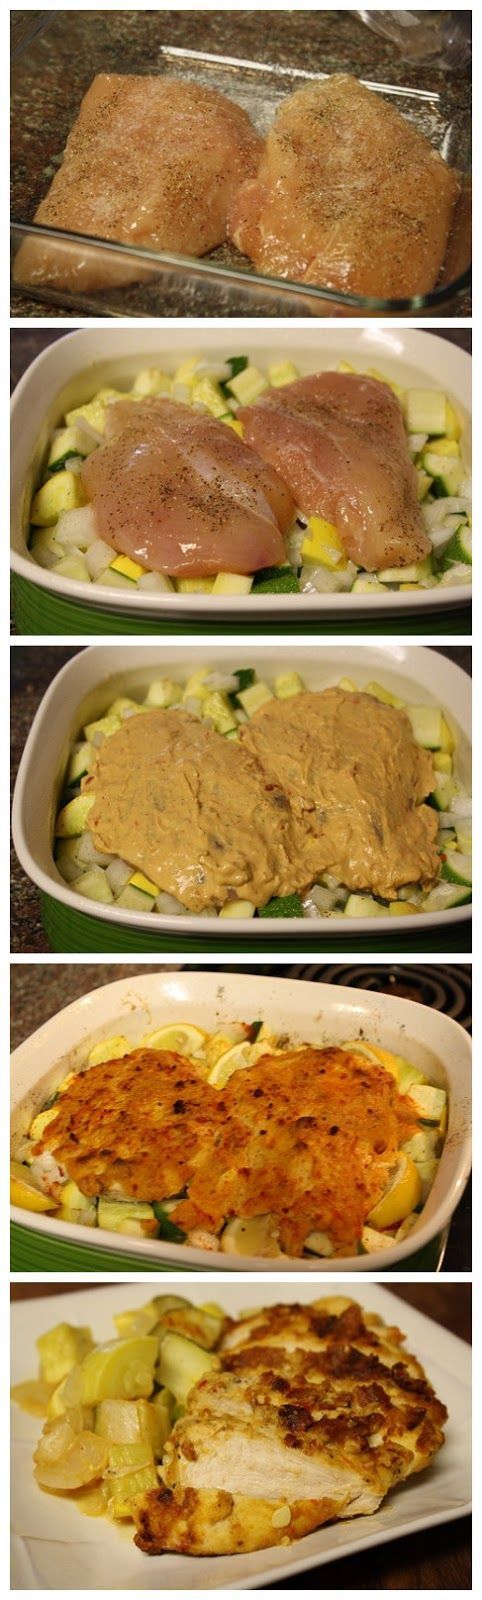 Hummus Crusted Chicken–weve done this with fresh roasted red pepper hummus without the veggies….we are definitely going to try